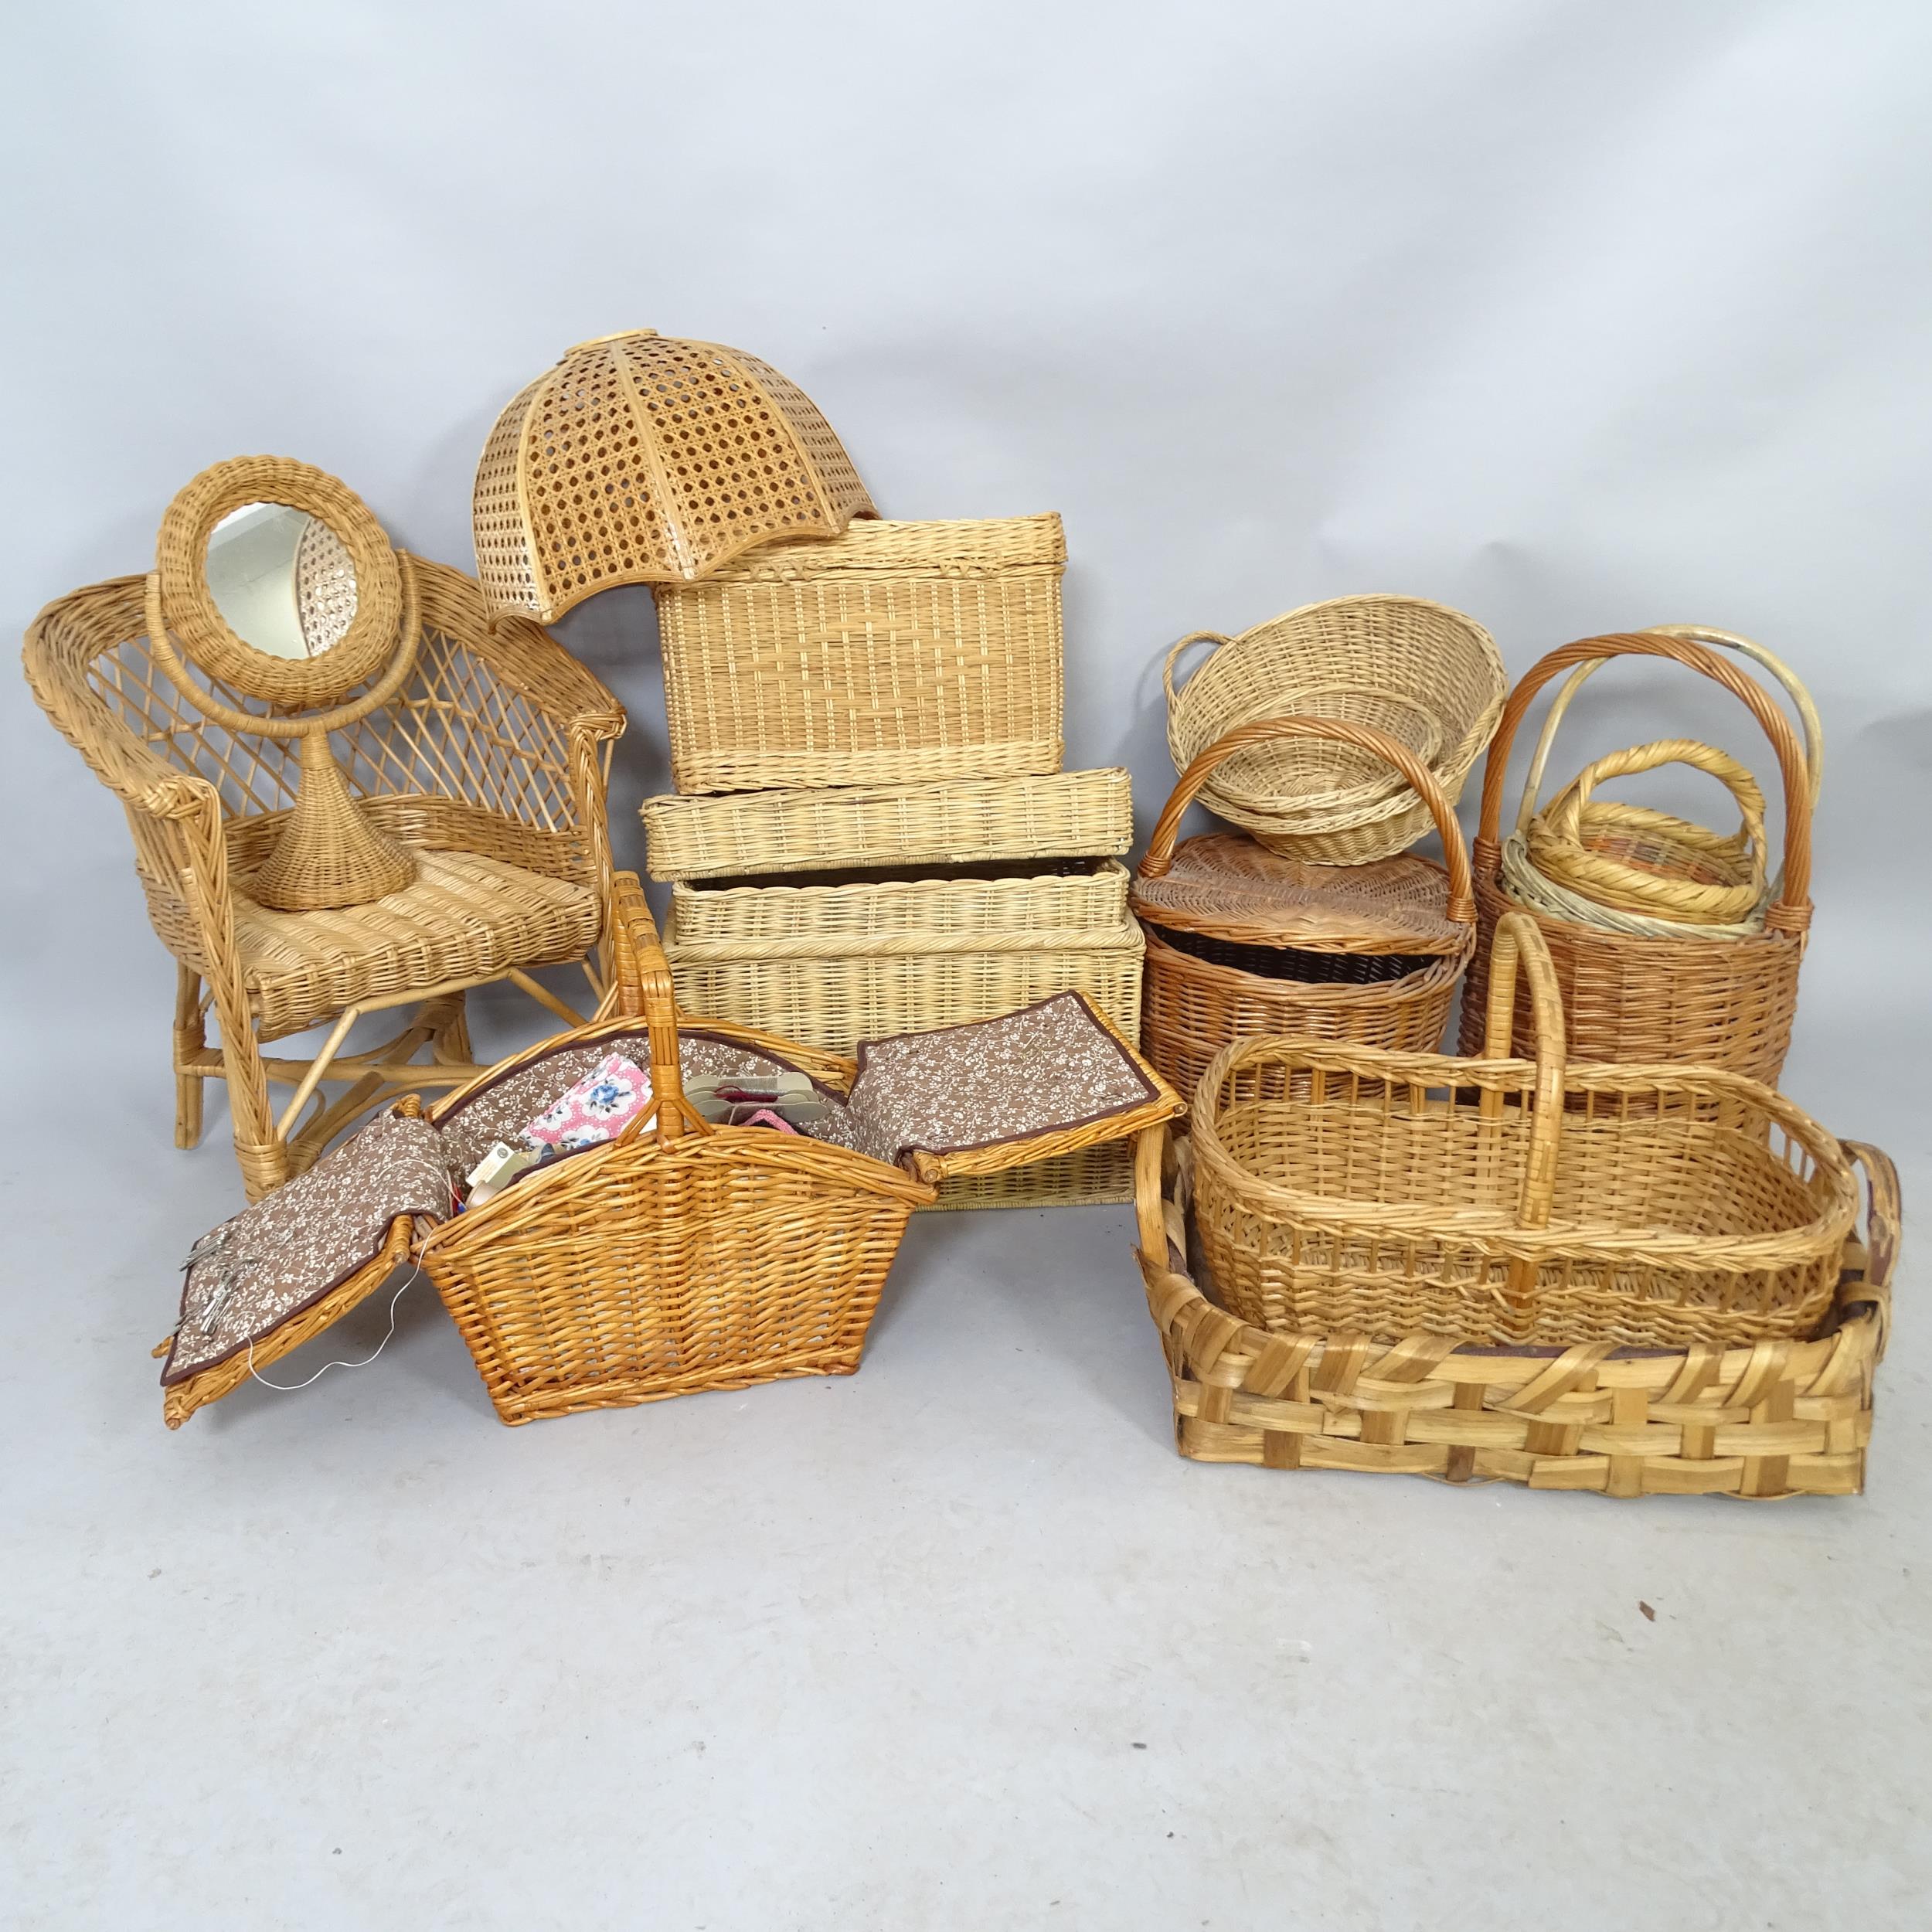 Various wicker baskets including a sewing basket and contents, a mirror, a child's chair etc.